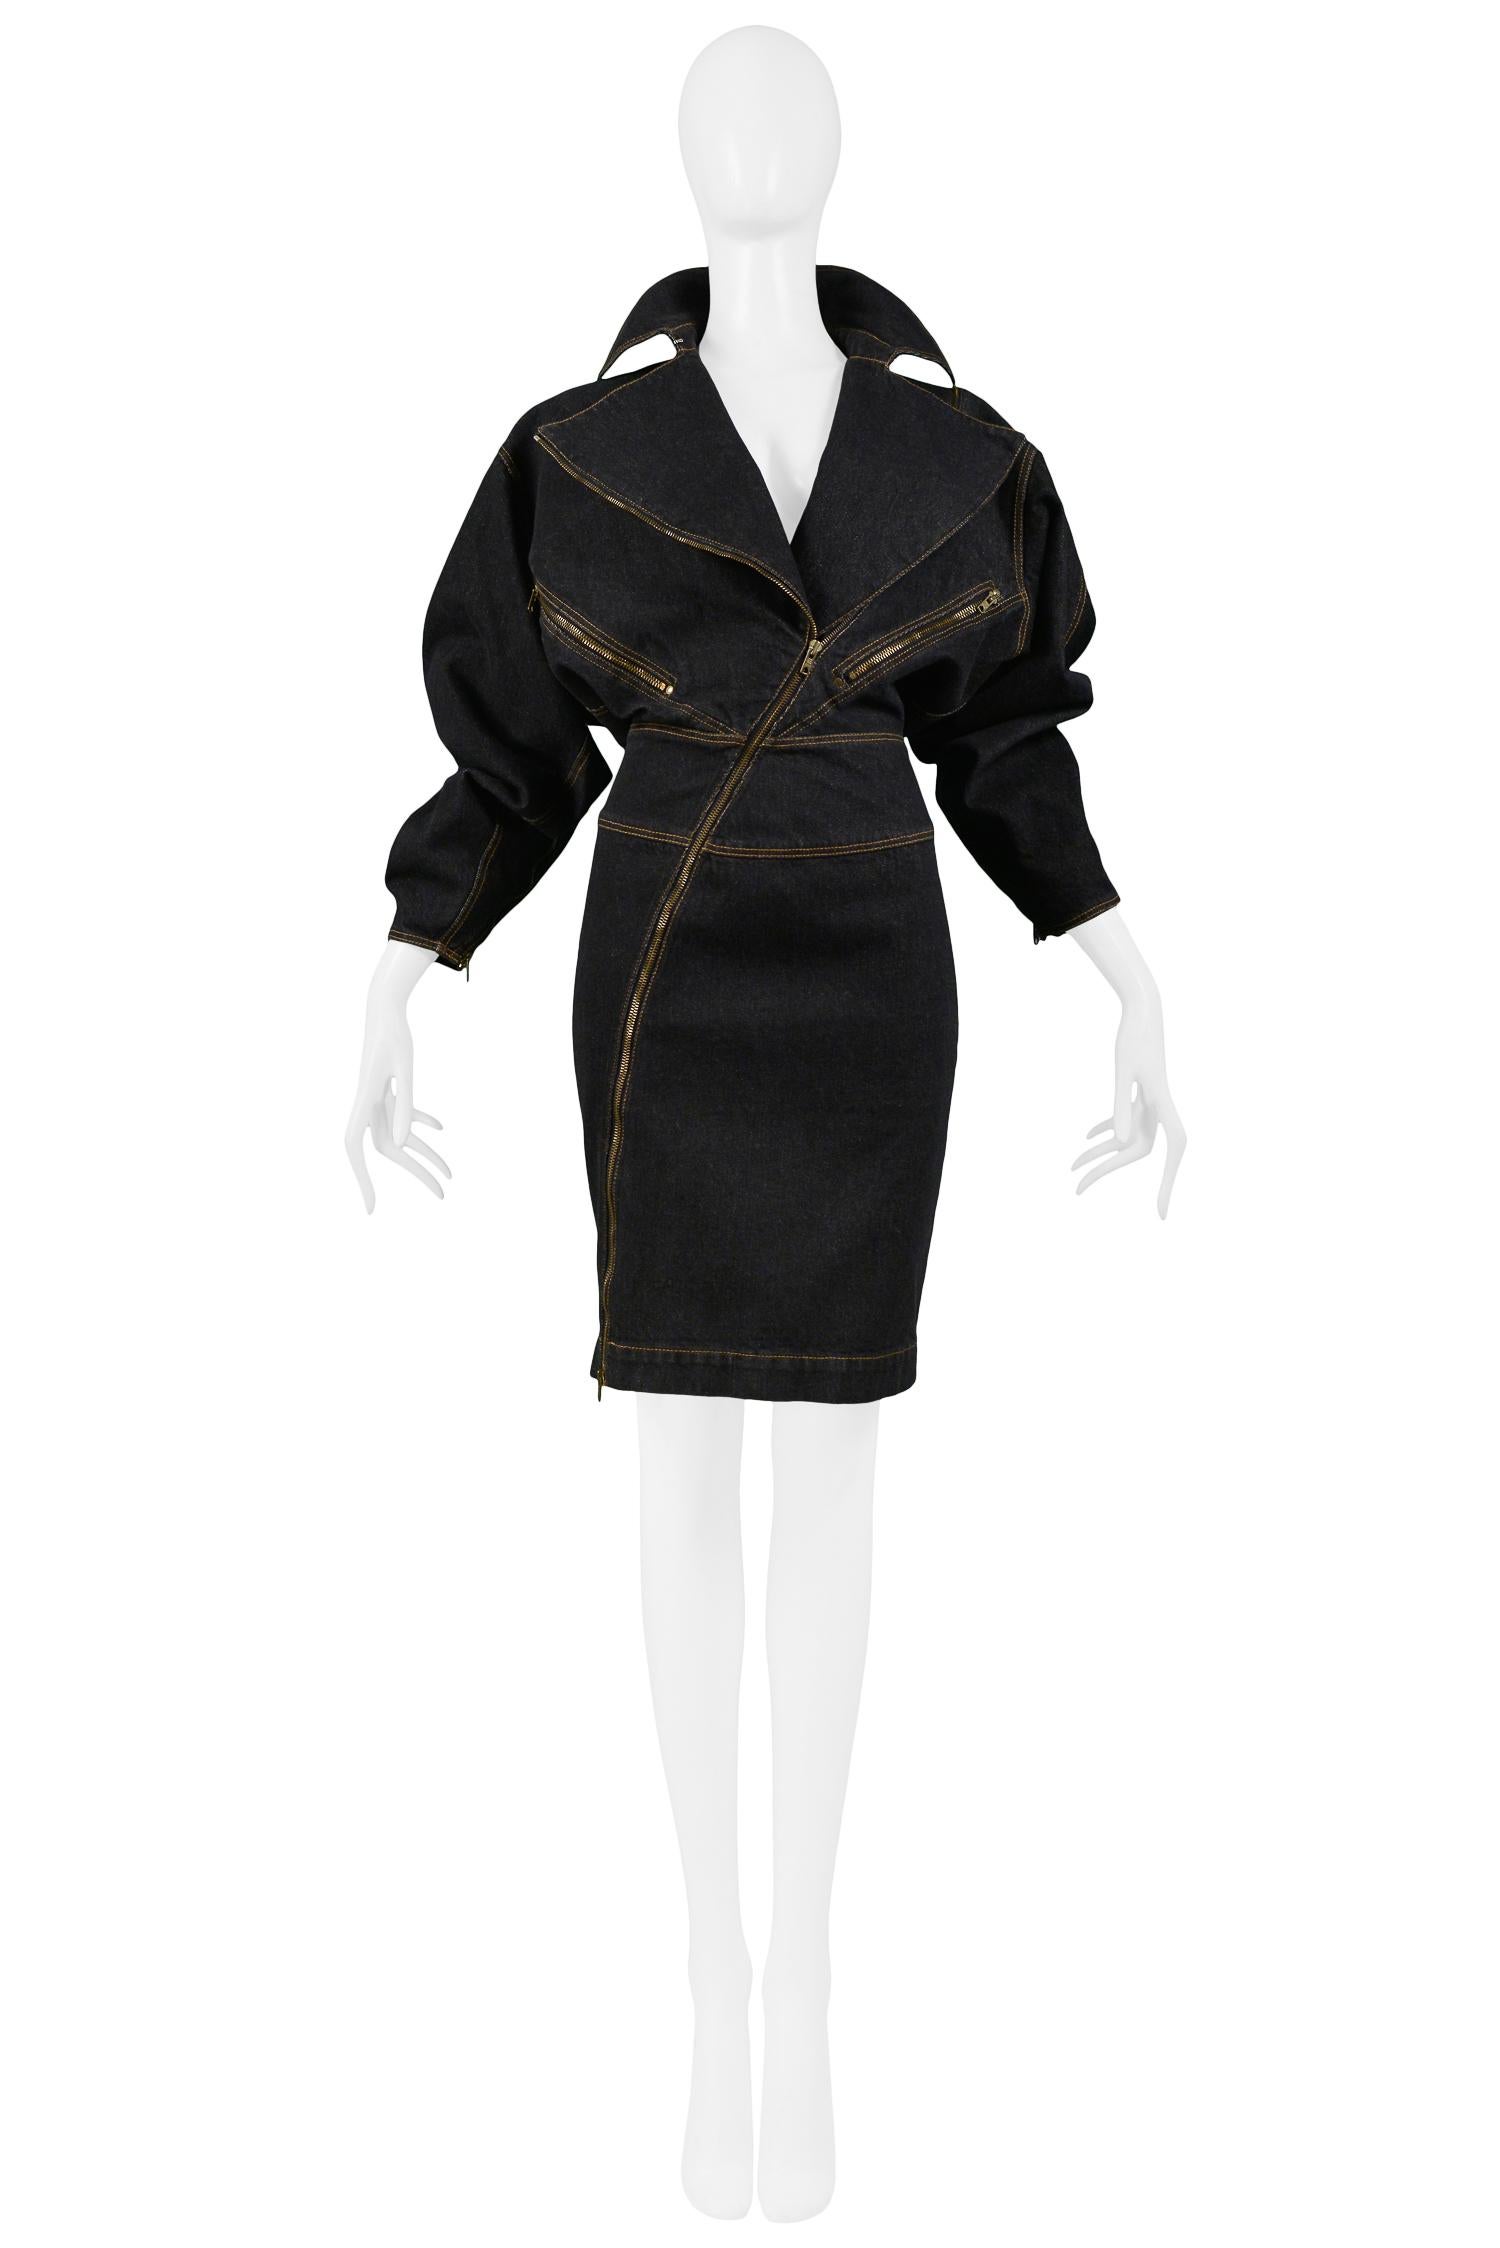 Vintage Azzedine Alaia black denim dress with an oversized collar, contrasting yellow topstitching, an asymmetrical bronze zipper, front and back zipper pockets, fitted skirt, and knee-length. The bodice has a relaxed, comfortable fit, and the skirt